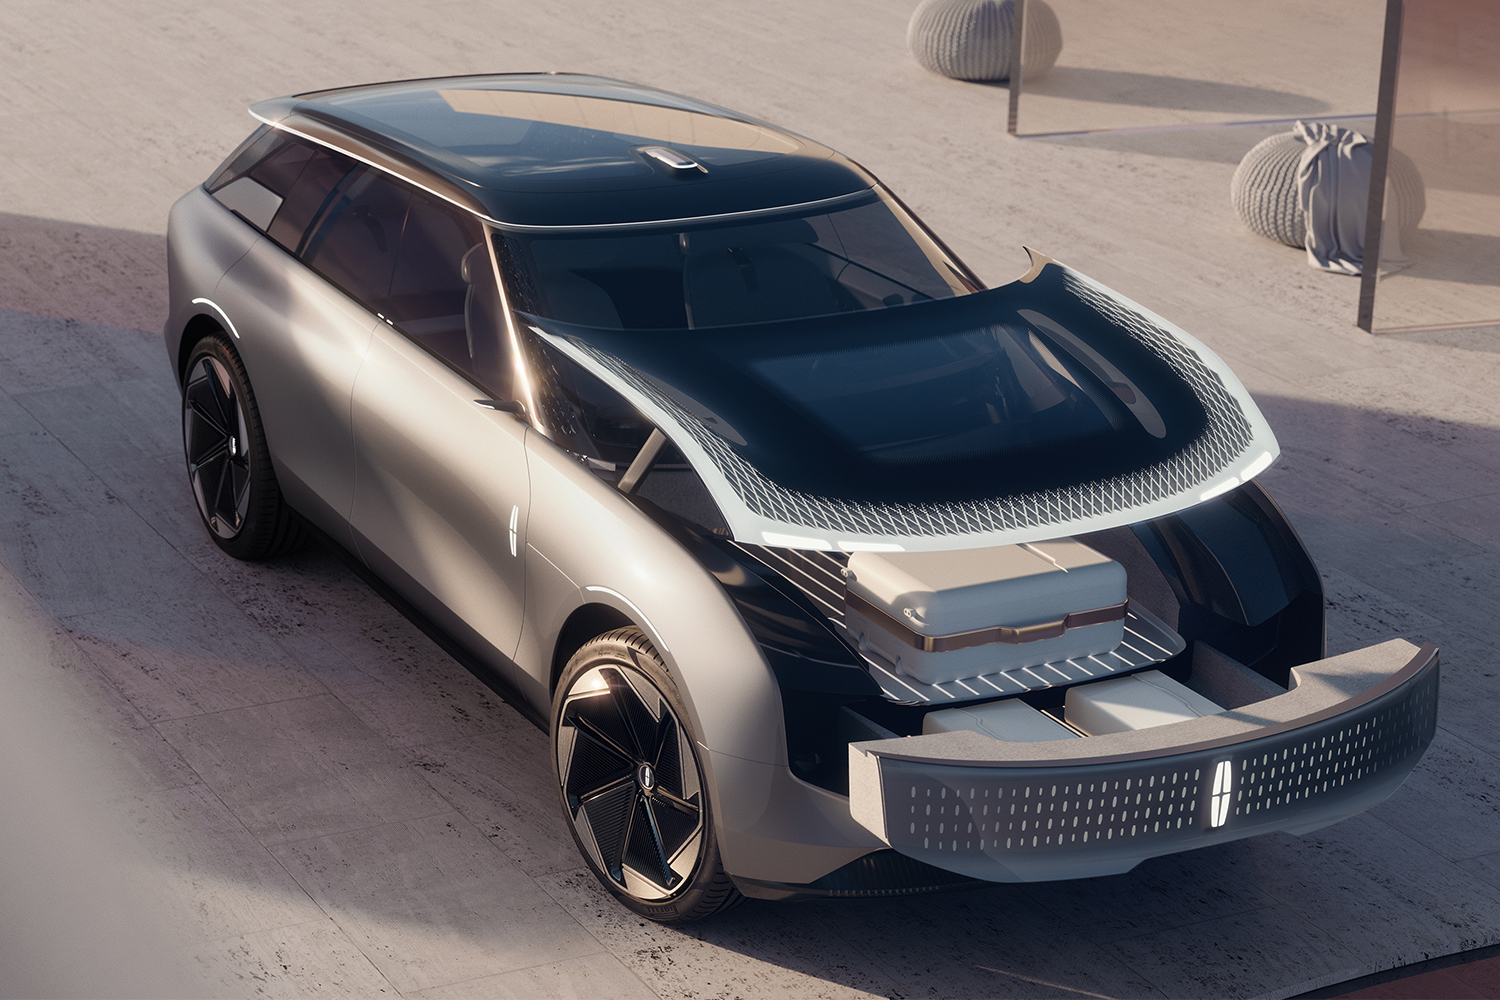 The Lincoln Star Concept, an electric SUV that shows what's to come for Ford's luxury brand as it shifts to electric vehicles